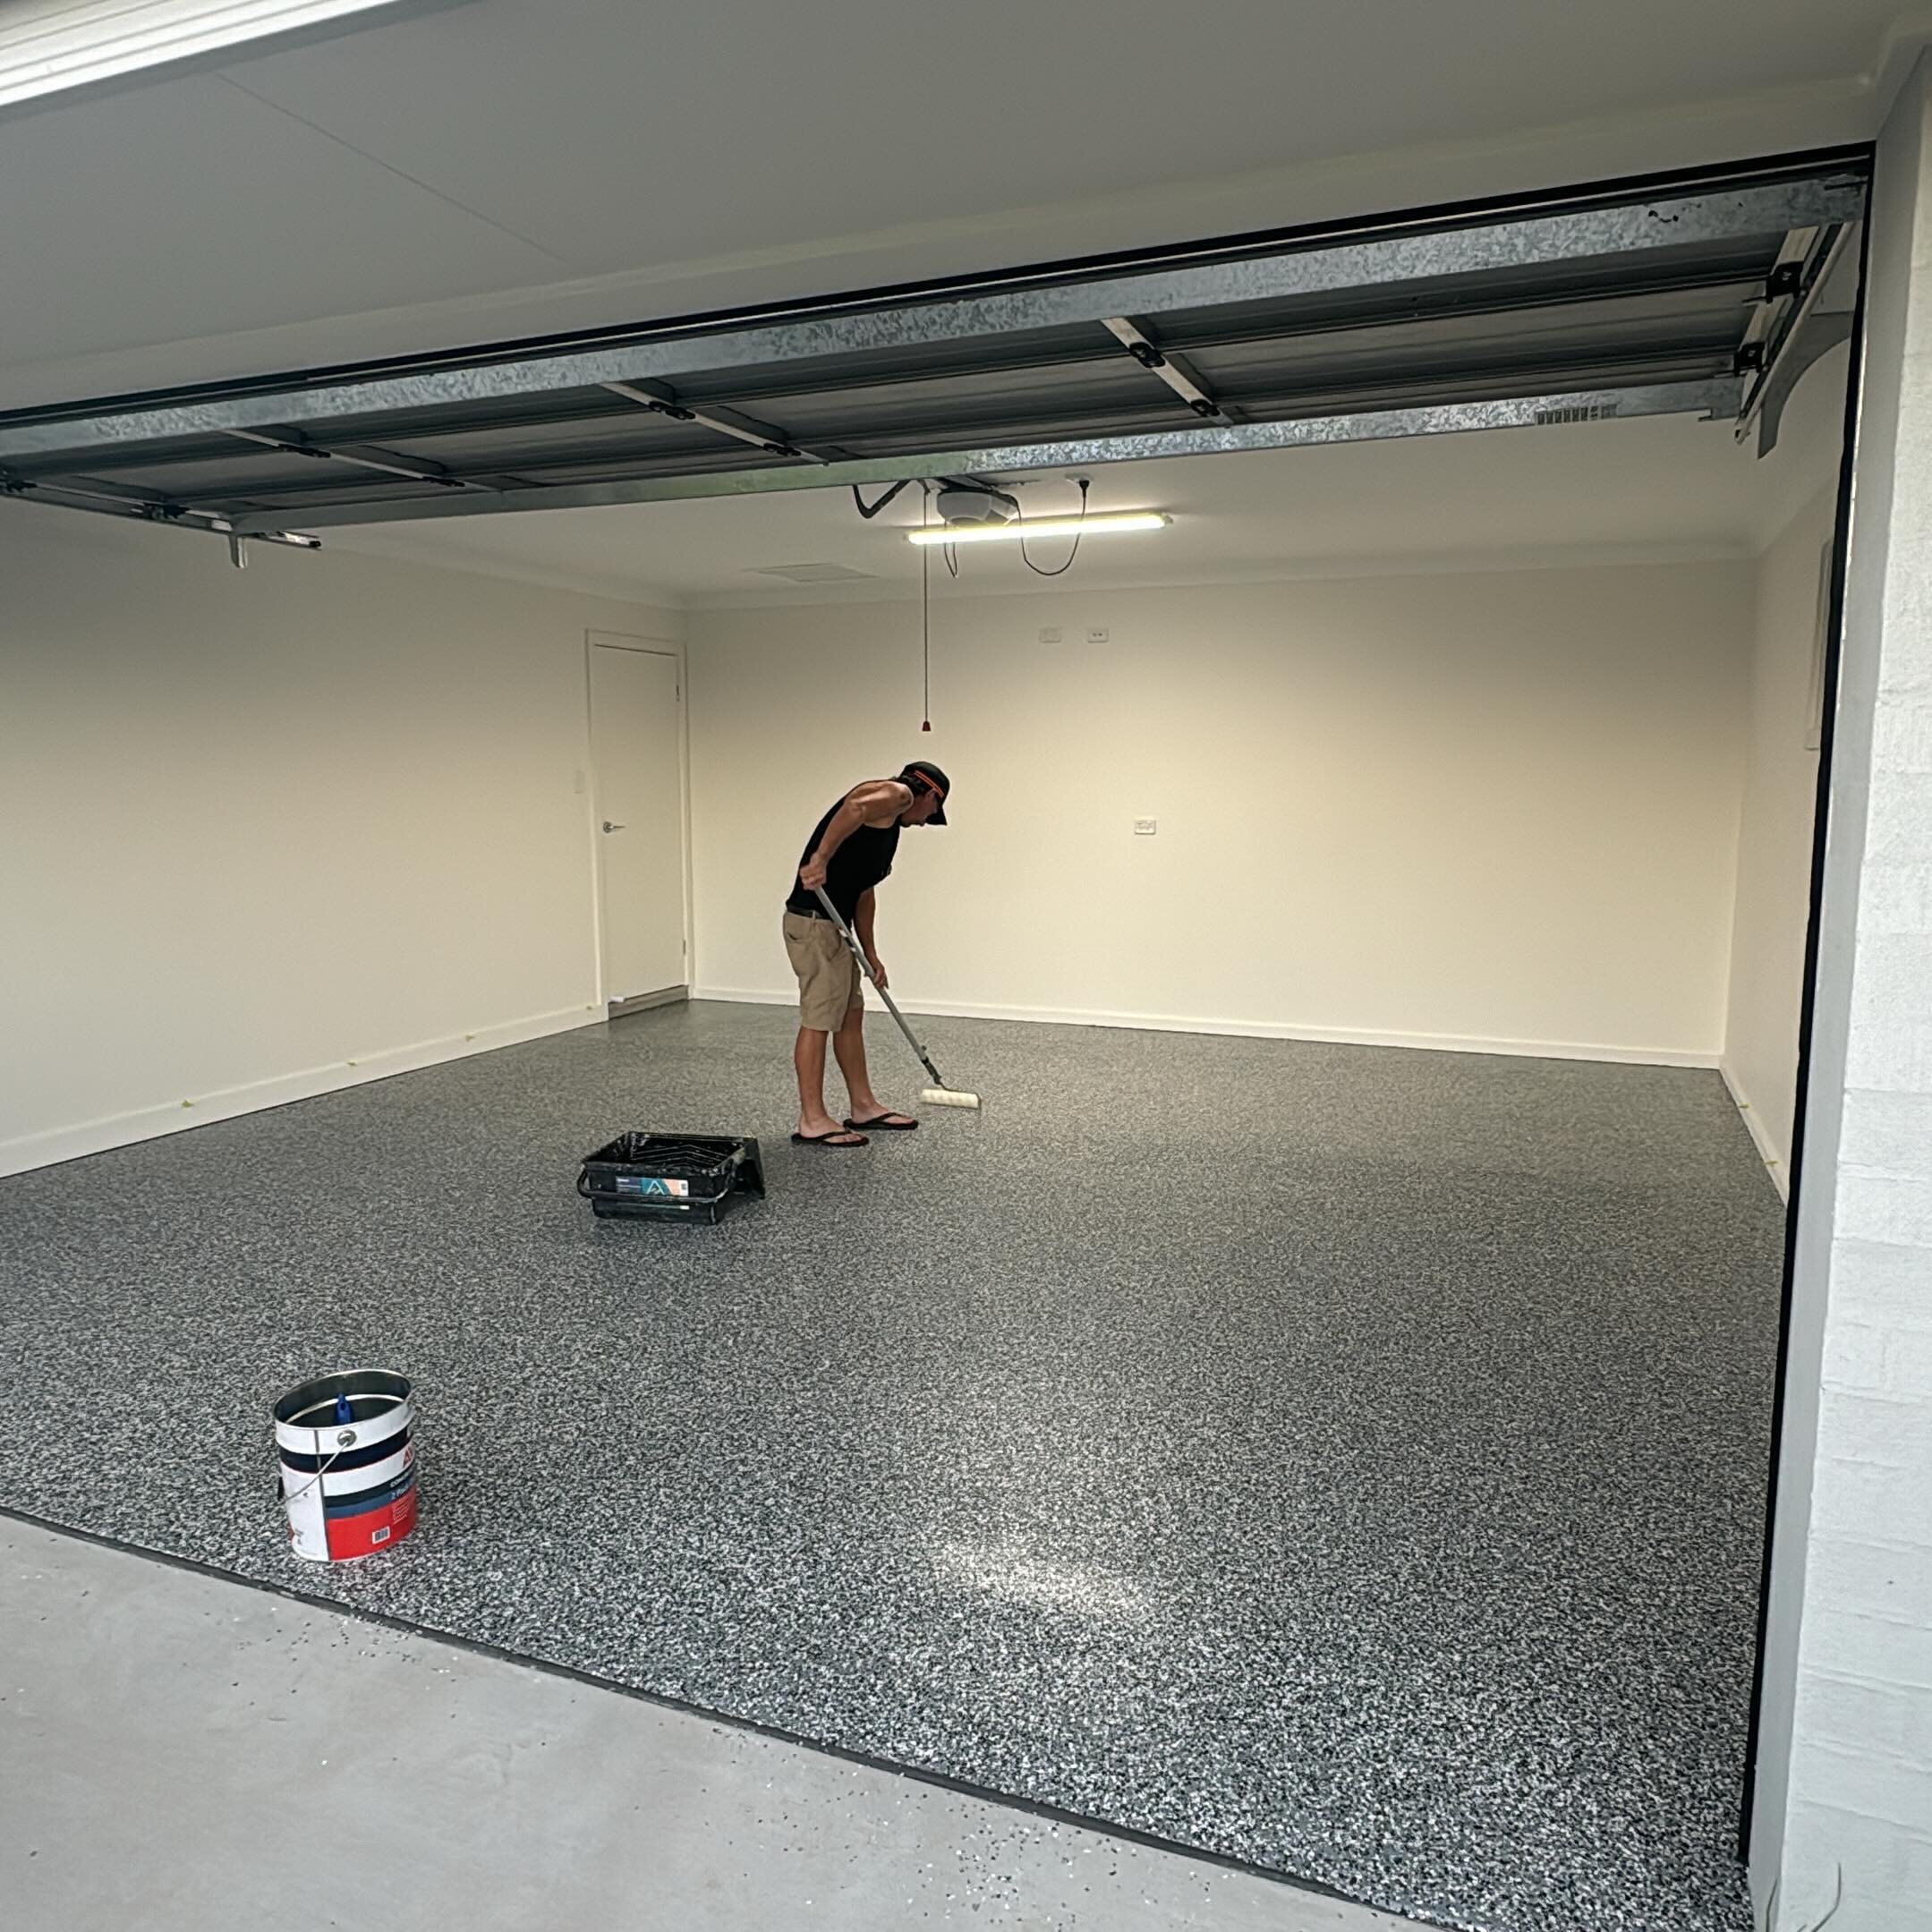 Make your garage floor a fleck above the rest 
Avista 2 pack epoxy flooring 
Can&rsquo;t go wrong.